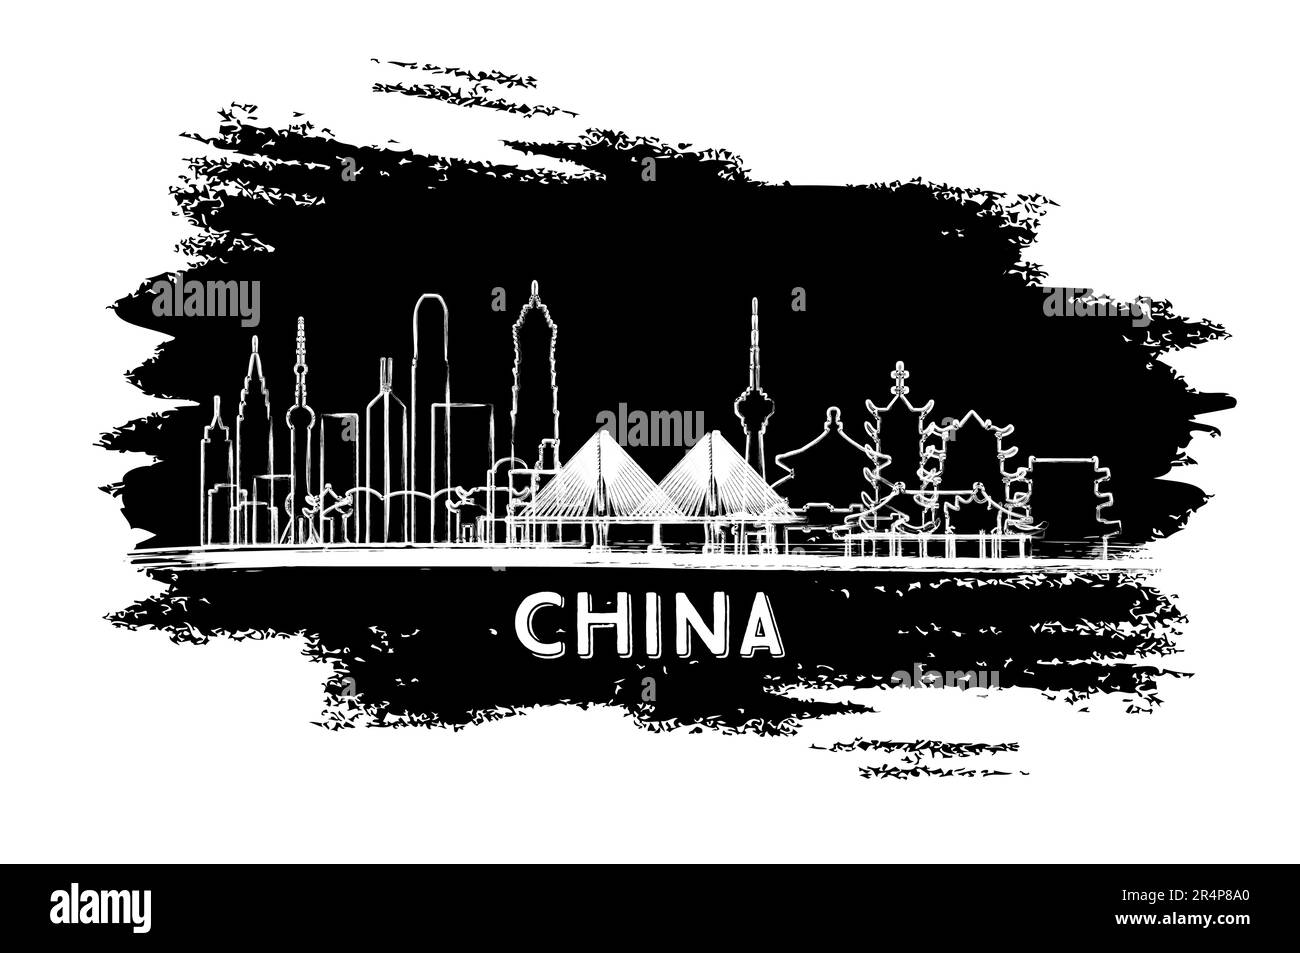 China City Skyline Silhouette. Hand Drawn Sketch. Business Travel and Tourism Concept with Modern Architecture. Vector Illustration. Stock Vector